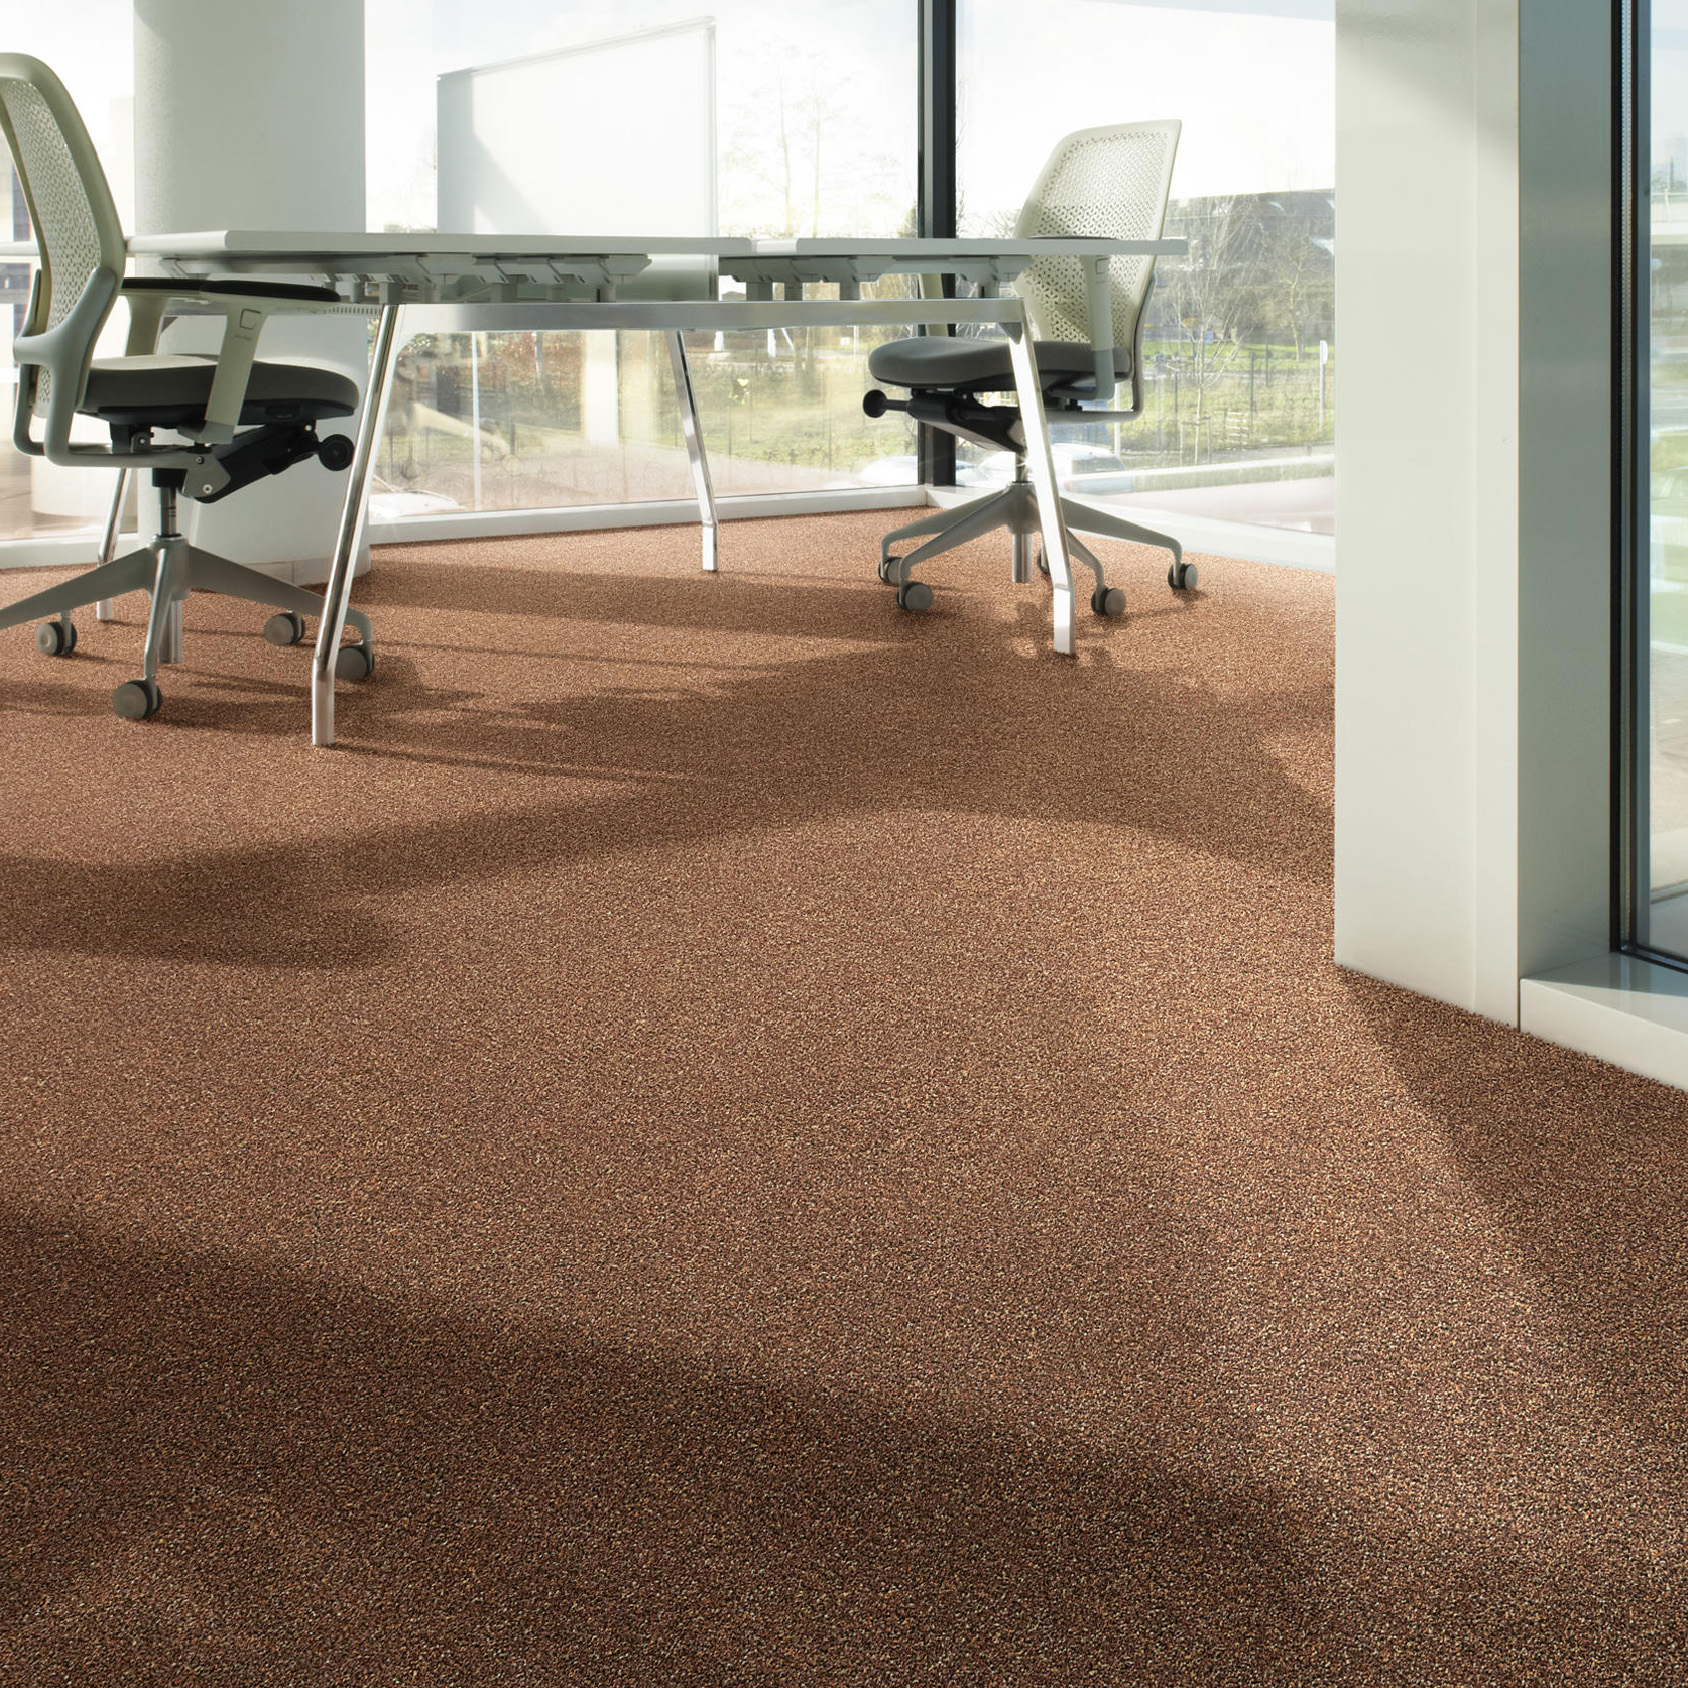 Desso Arcade Carpet Tile used in office work setting, in red tones